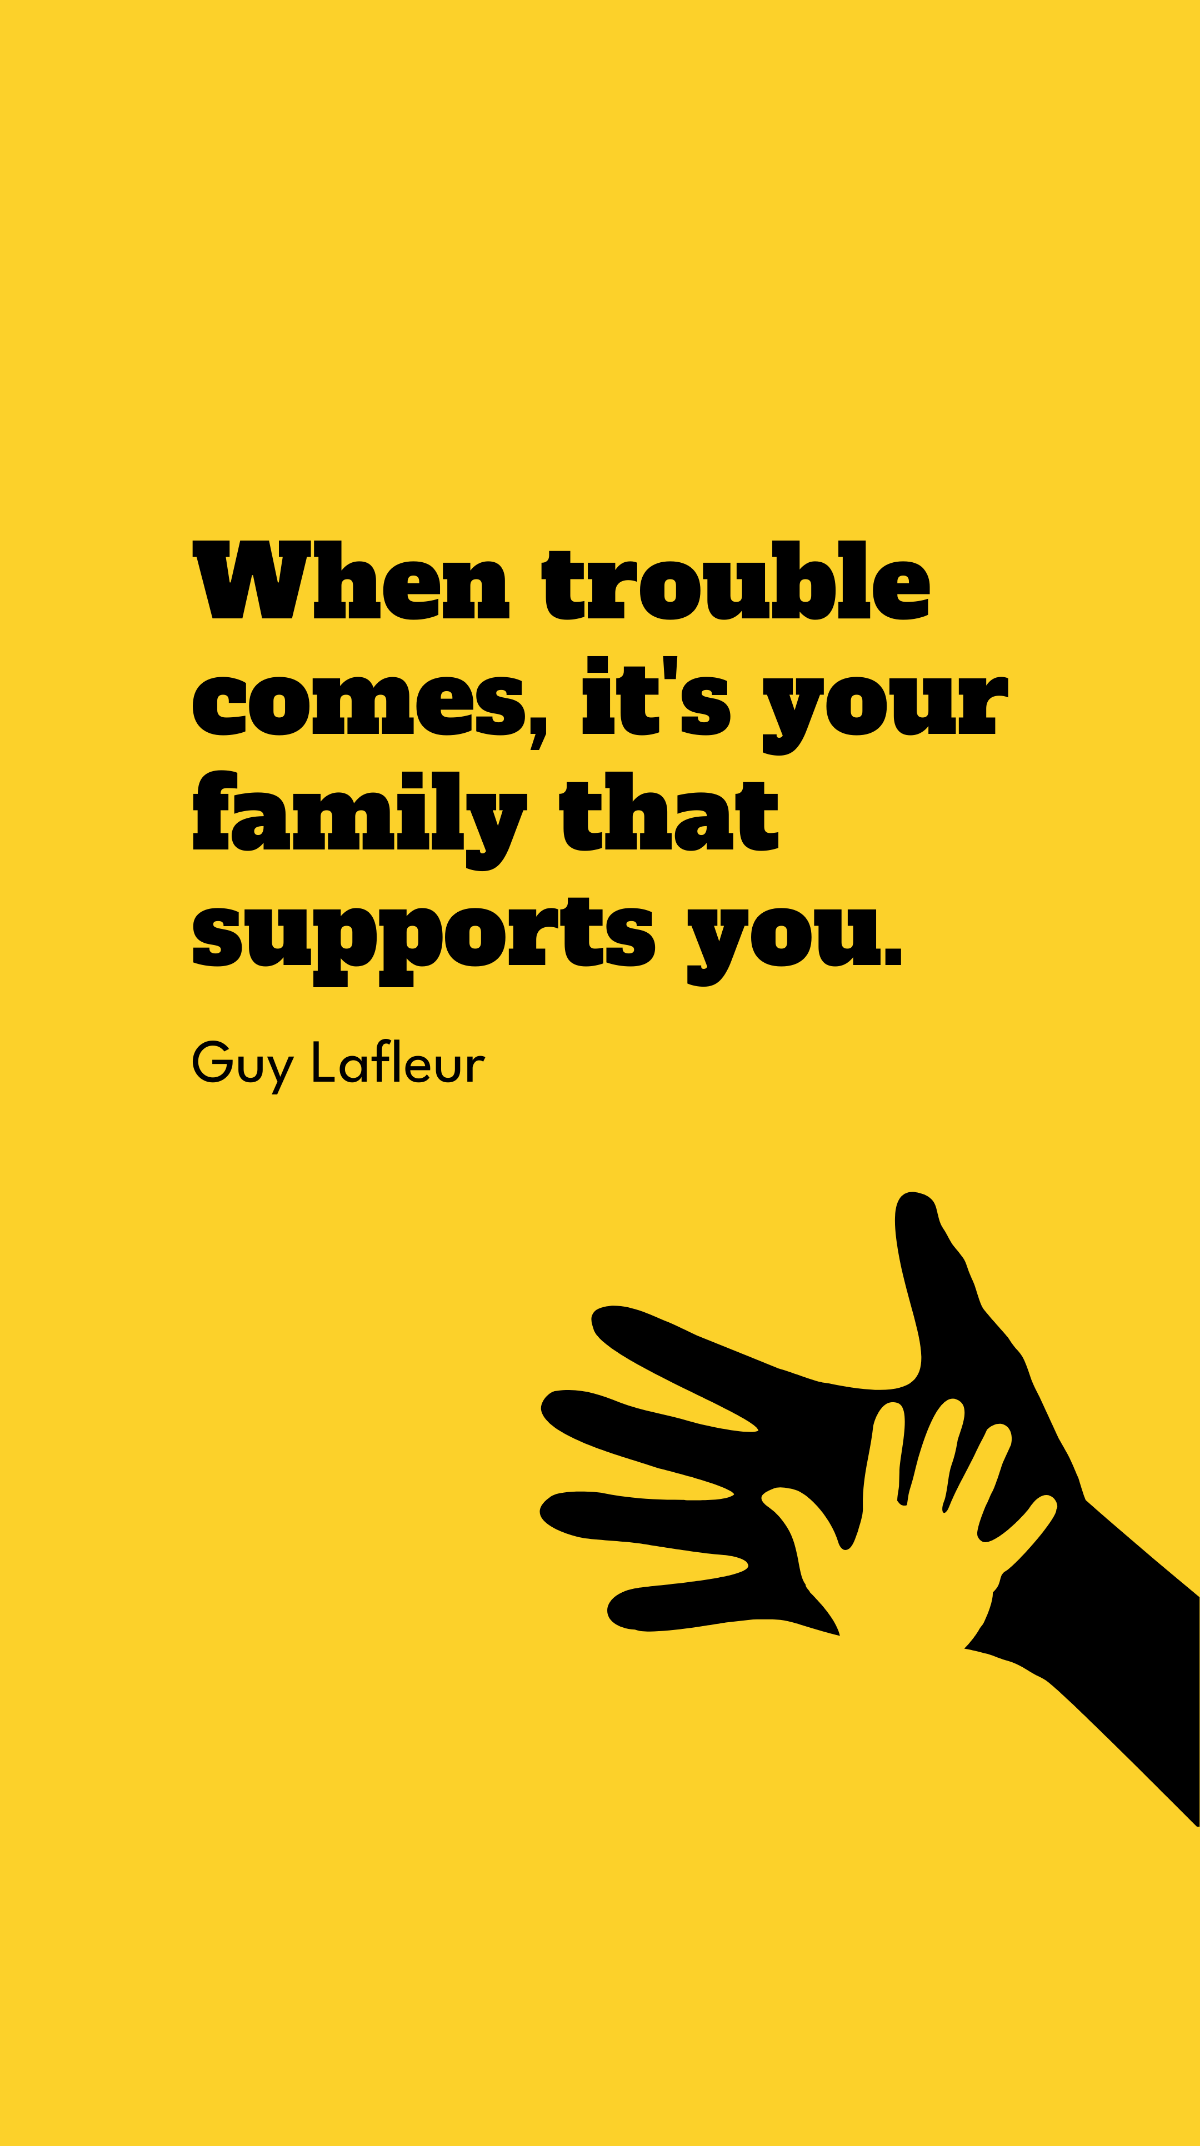 Guy Lafleur - When trouble comes, it's your family that supports you.